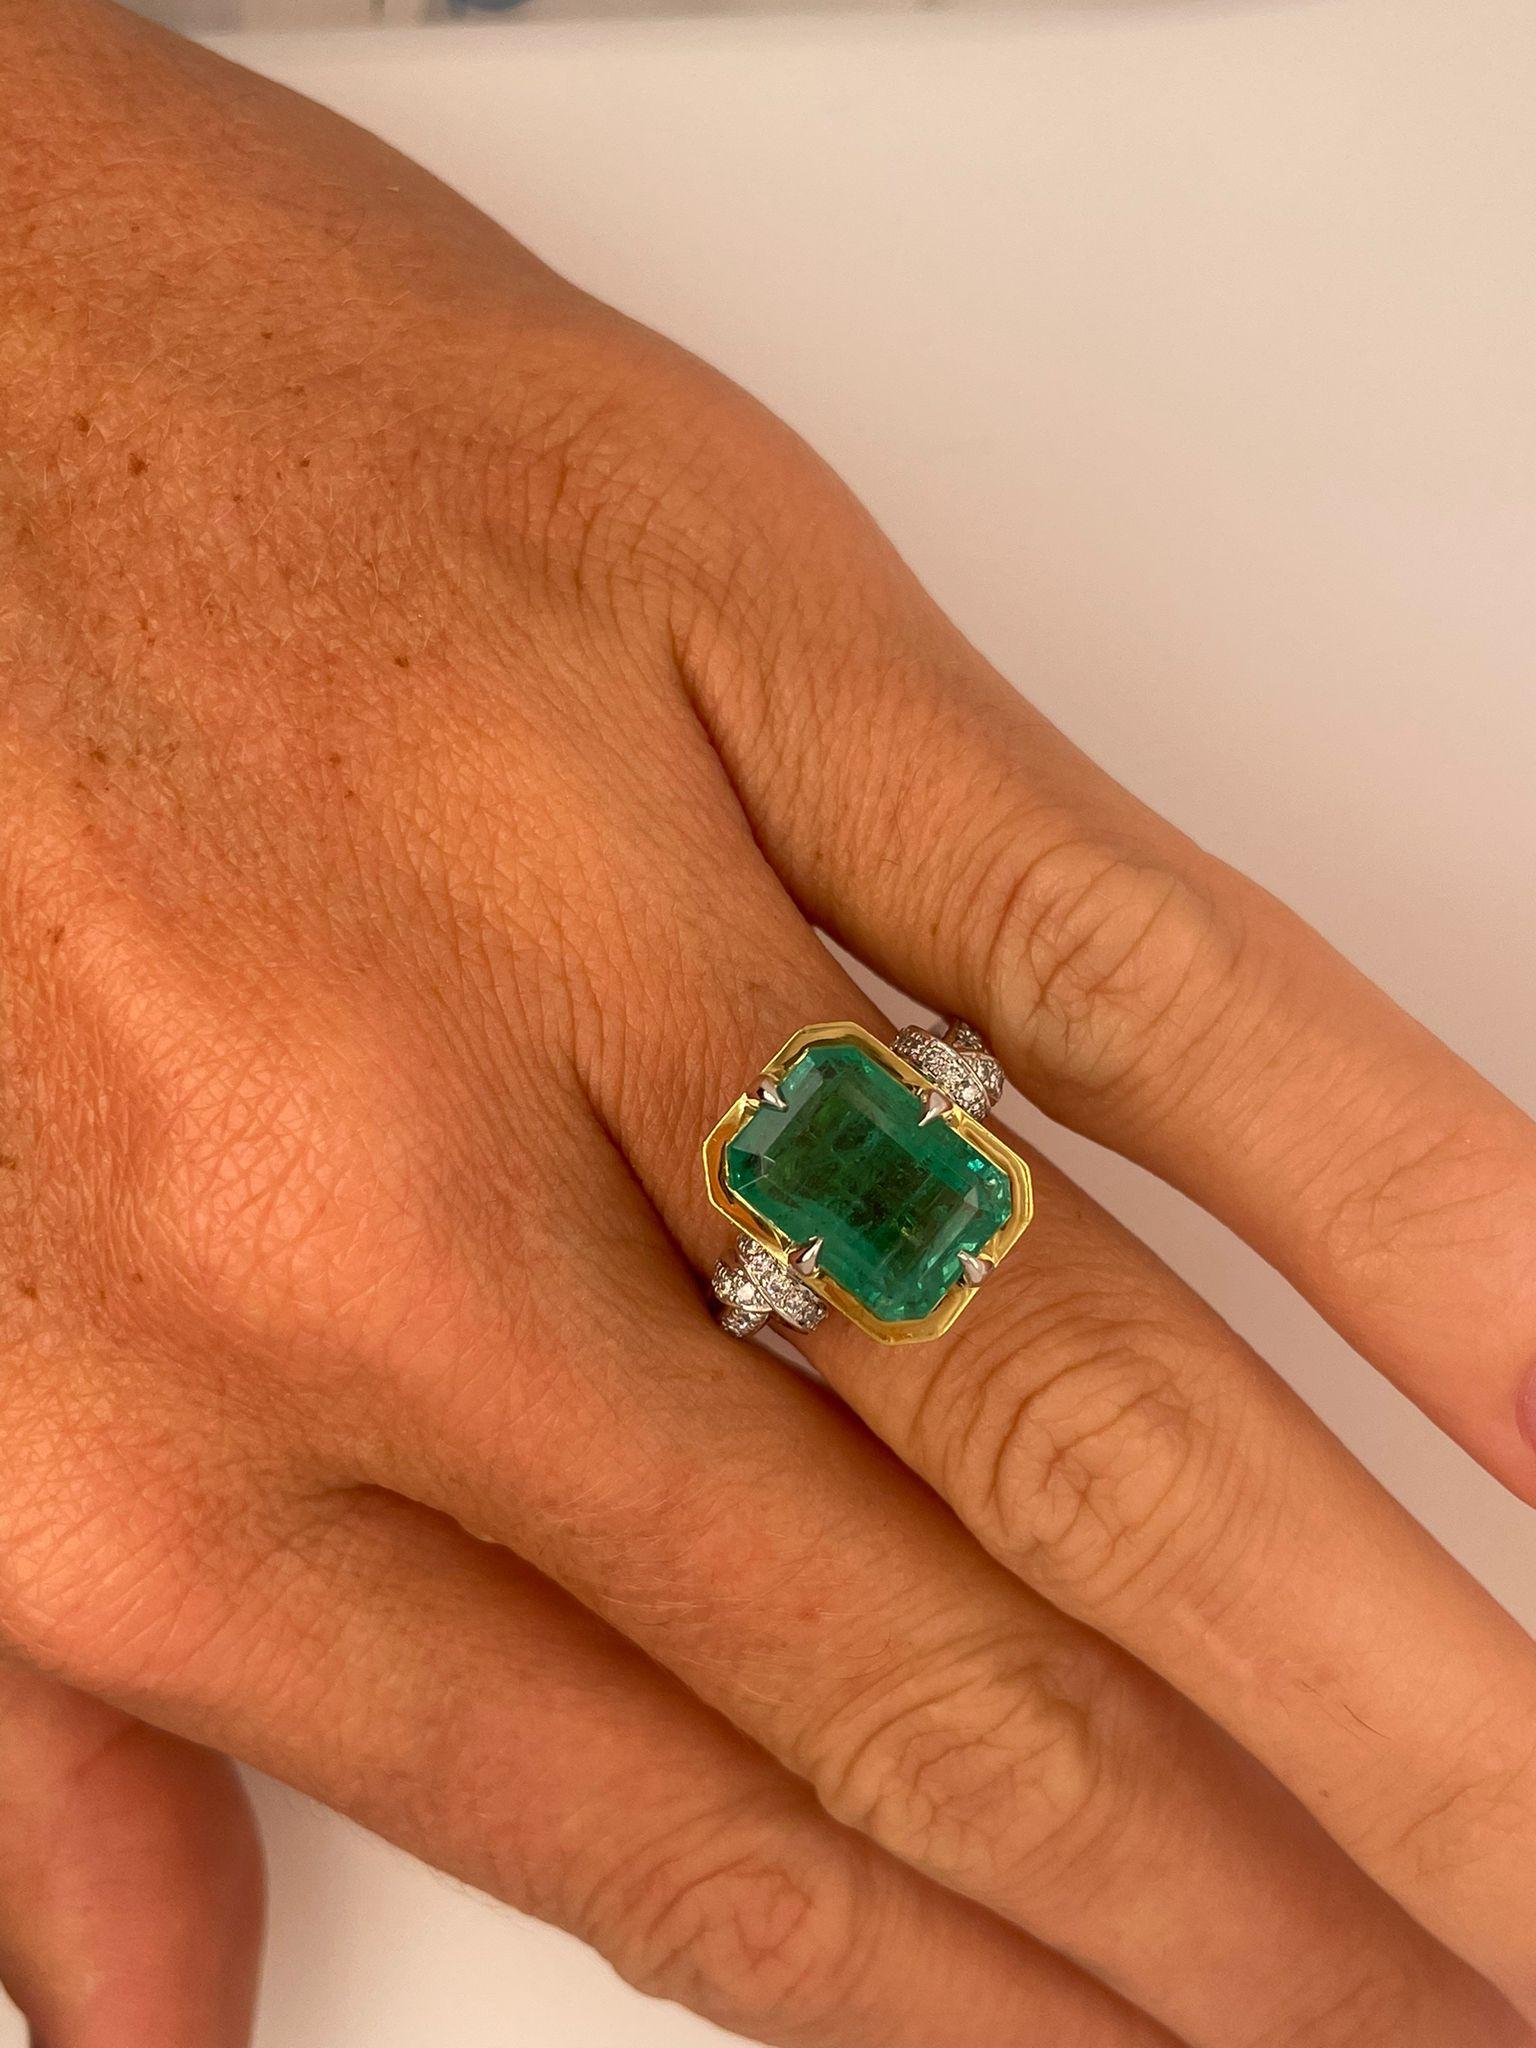 5.79 Carat Zambian Emerald in Forget Me Knot Style Ring with Diamonds 2